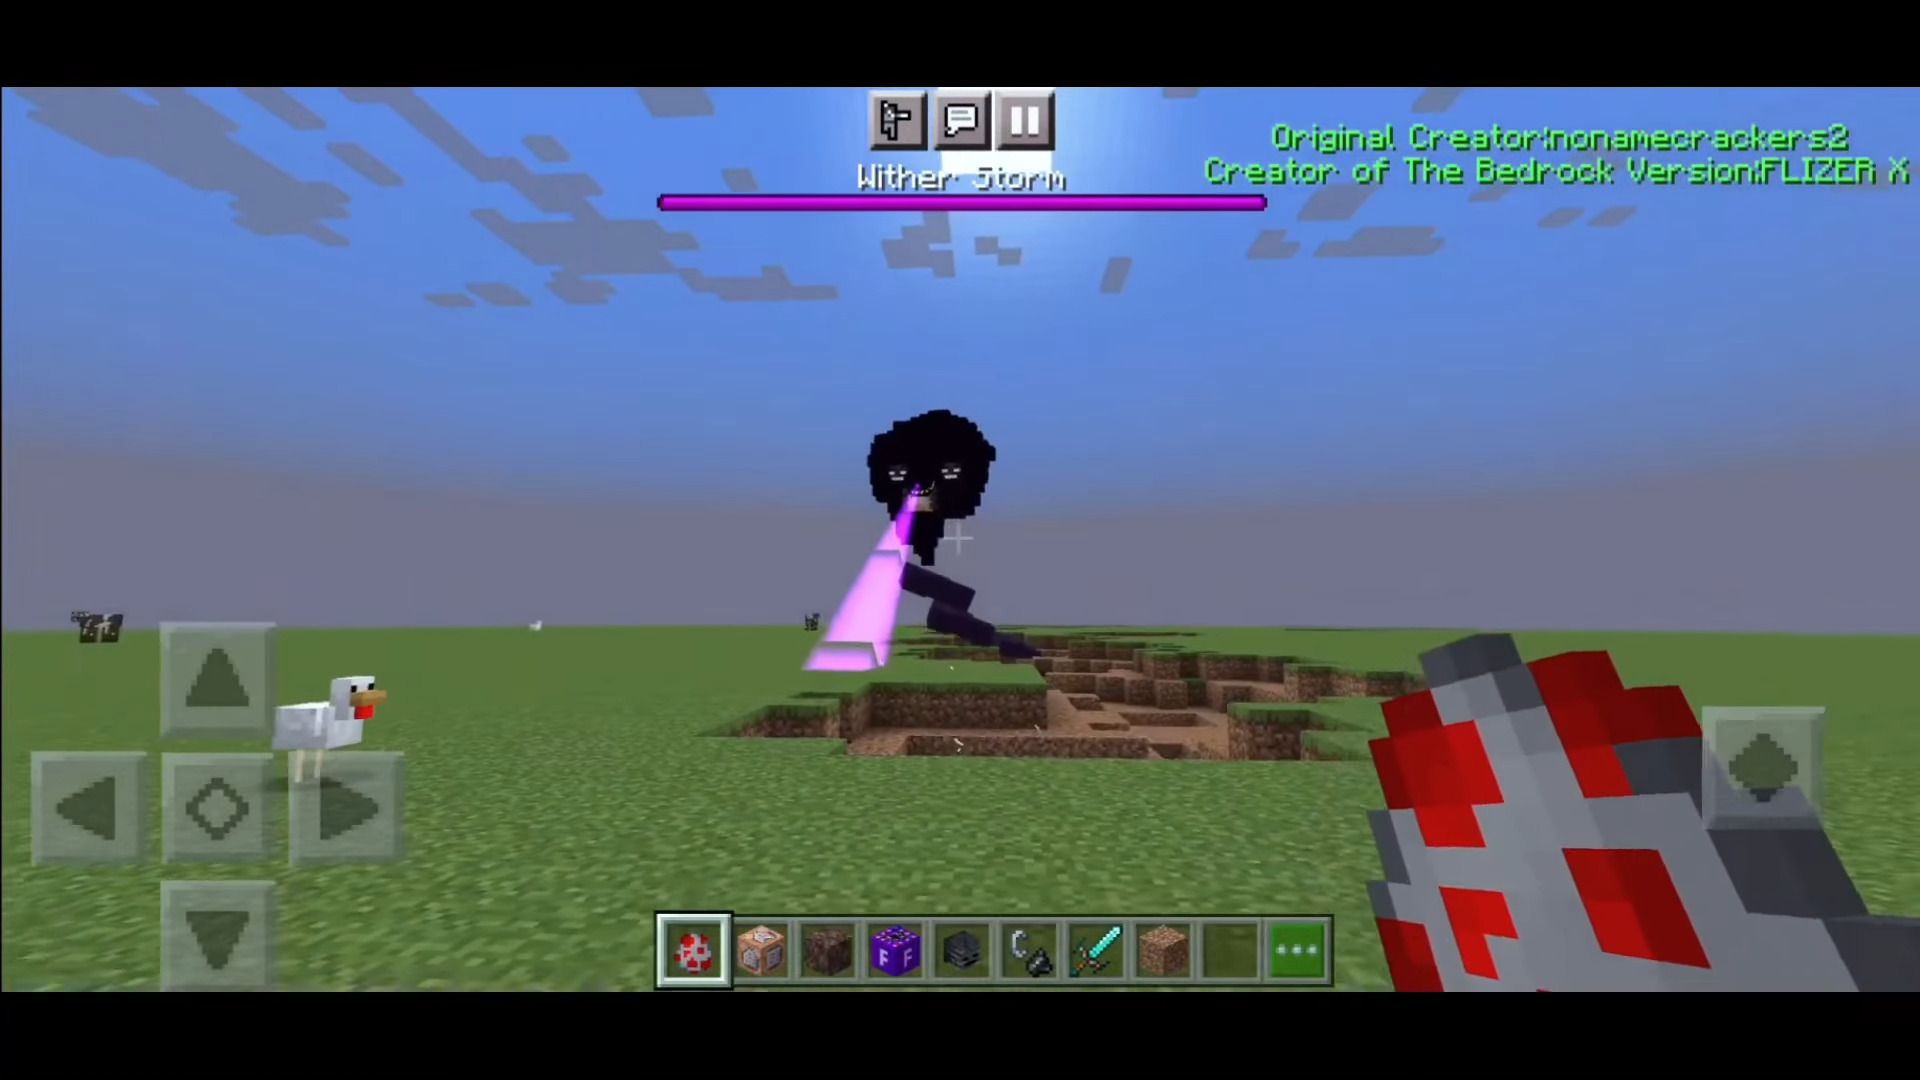 summoning the wither storm #minecraftmods #minecrafttutorial #minecraf, crackers wither storm mod